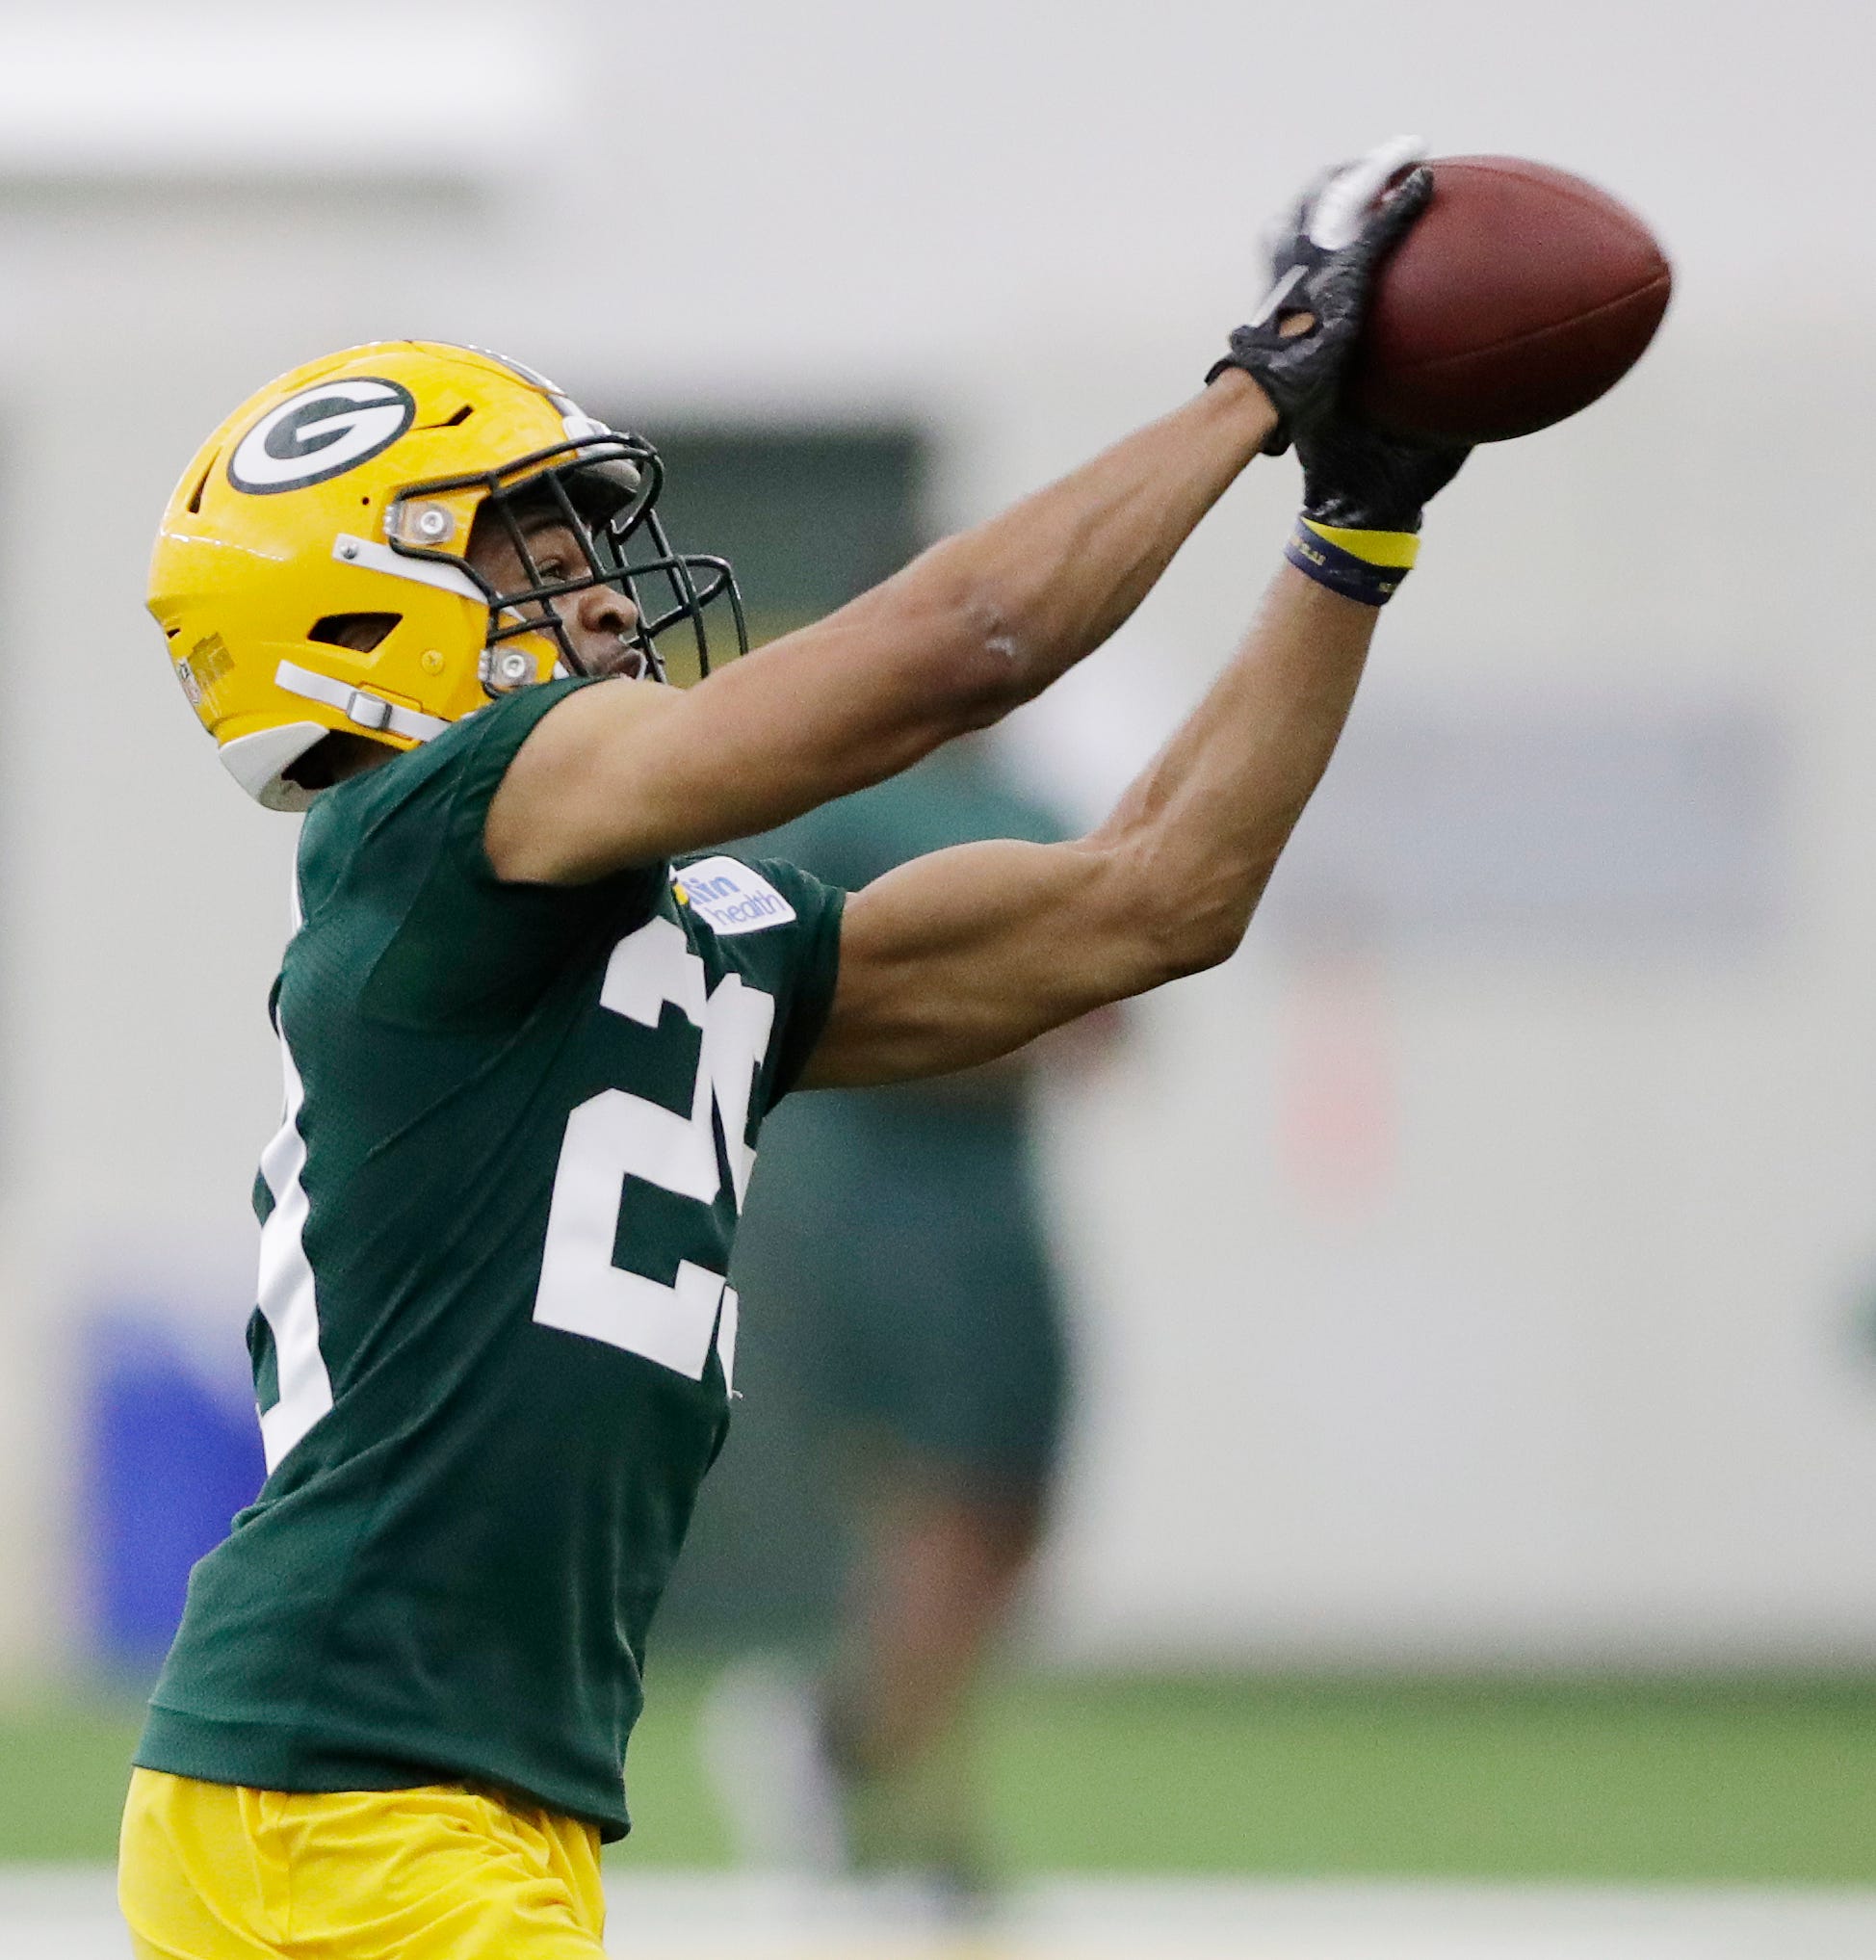 Green Bay Packers cornerback Ka’dar Hollman (29) during practice at rookie minicamp at the Don Hutson Center on Friday, May 3, 2019 in Ashwaubenon, Wis.
Adam Wesley/USA TODAY NETWORK-Wis